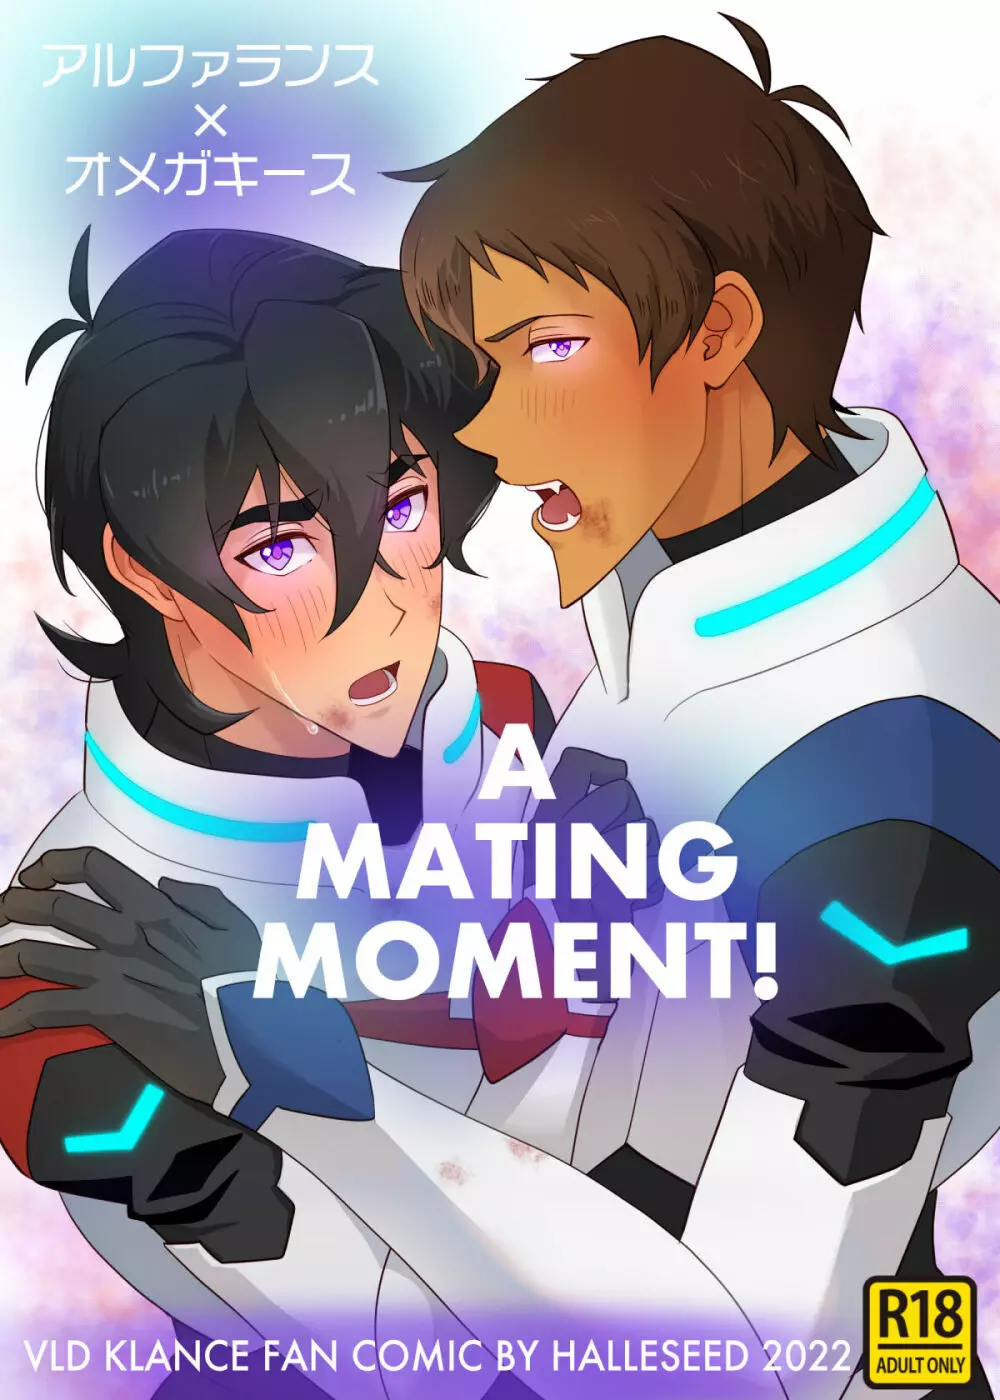 A MATING MOMENT! 1ページ